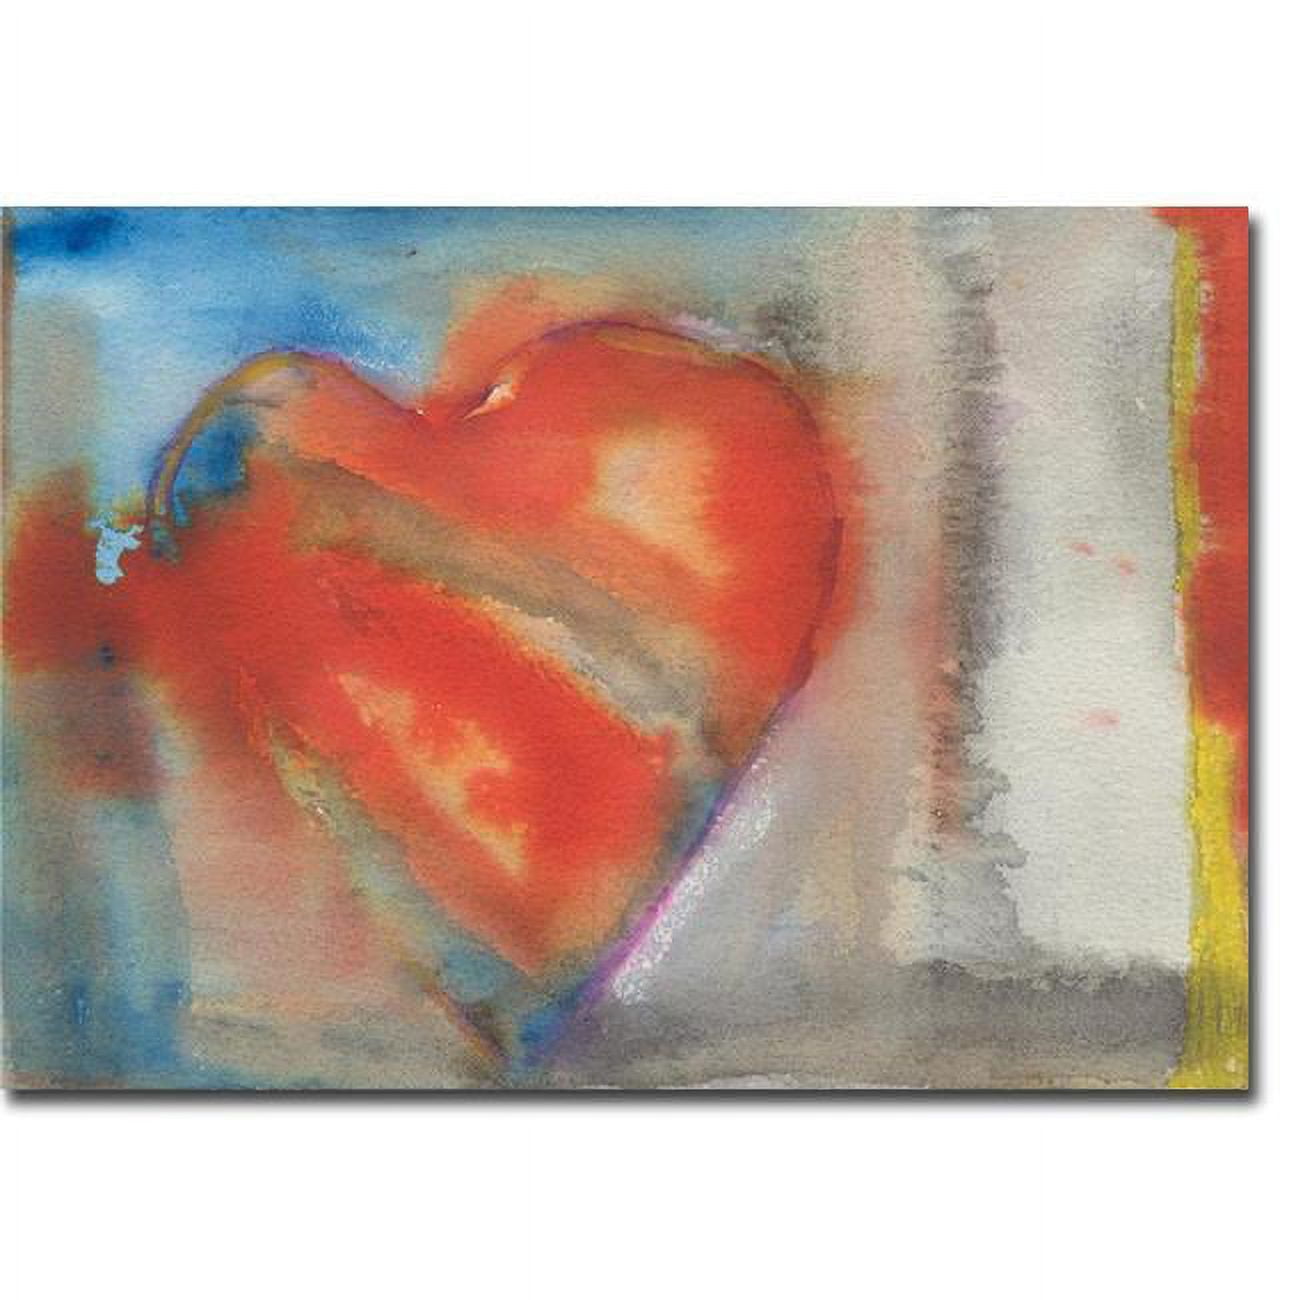 1216574tg Sweethearts Ii By Michelle Oppenheimer Premium Gallery-wrapped Canvas Giclee Art - 12 X 16 In.